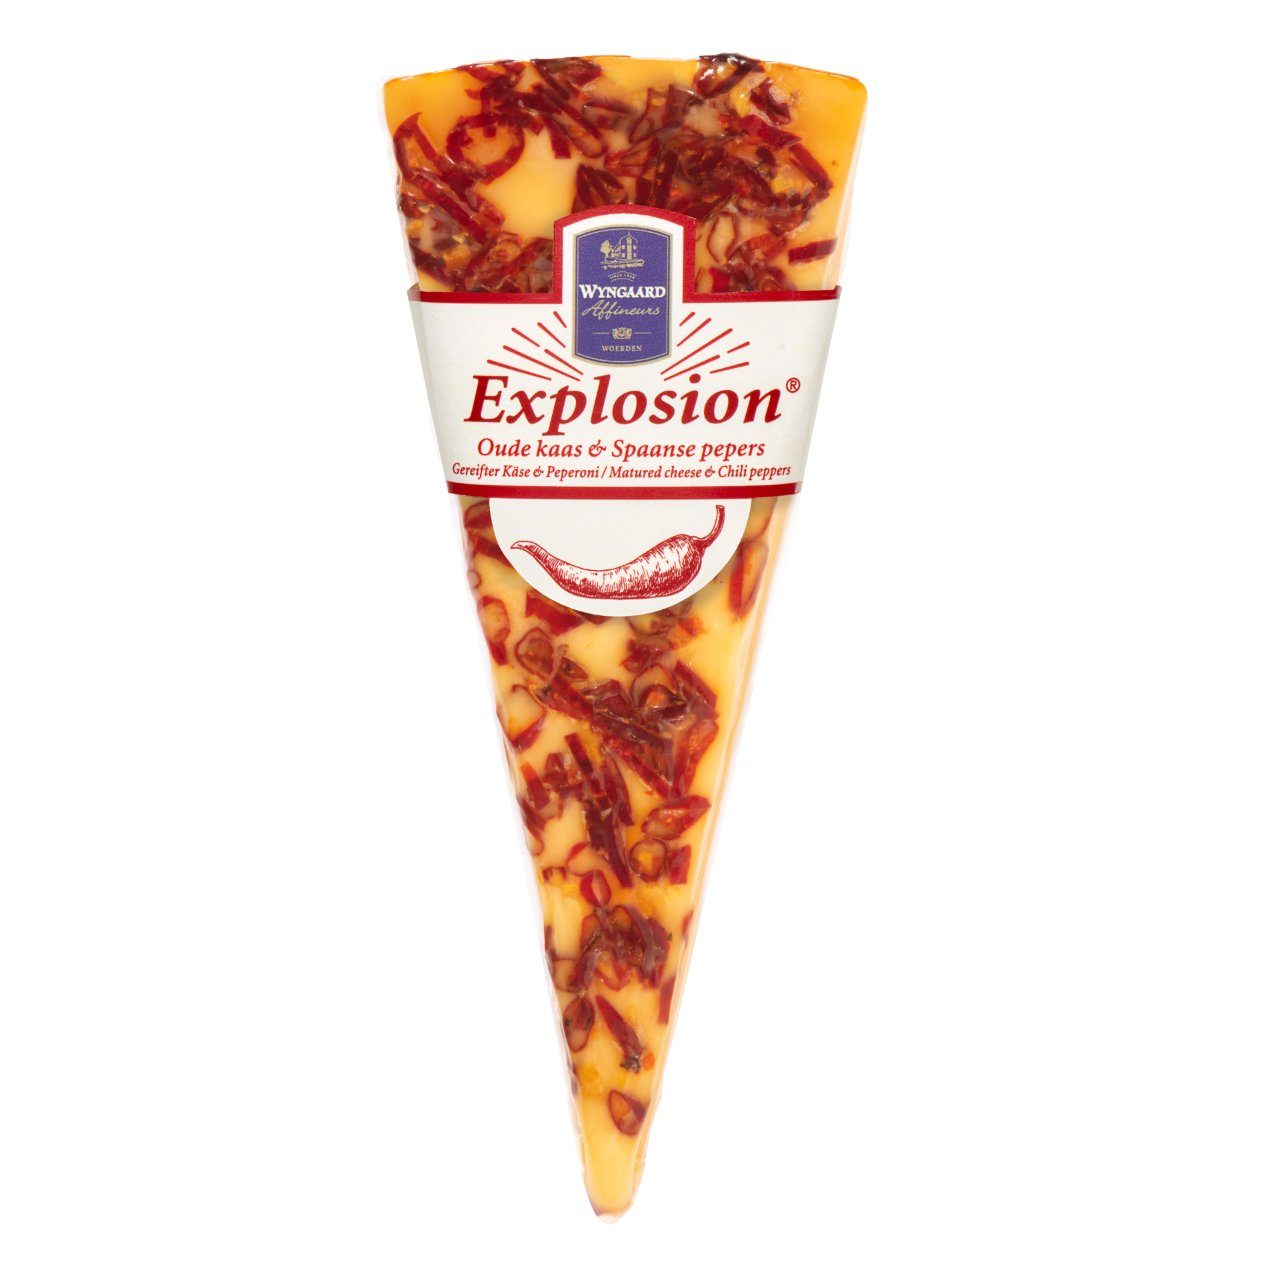 Explosion, met peper topping